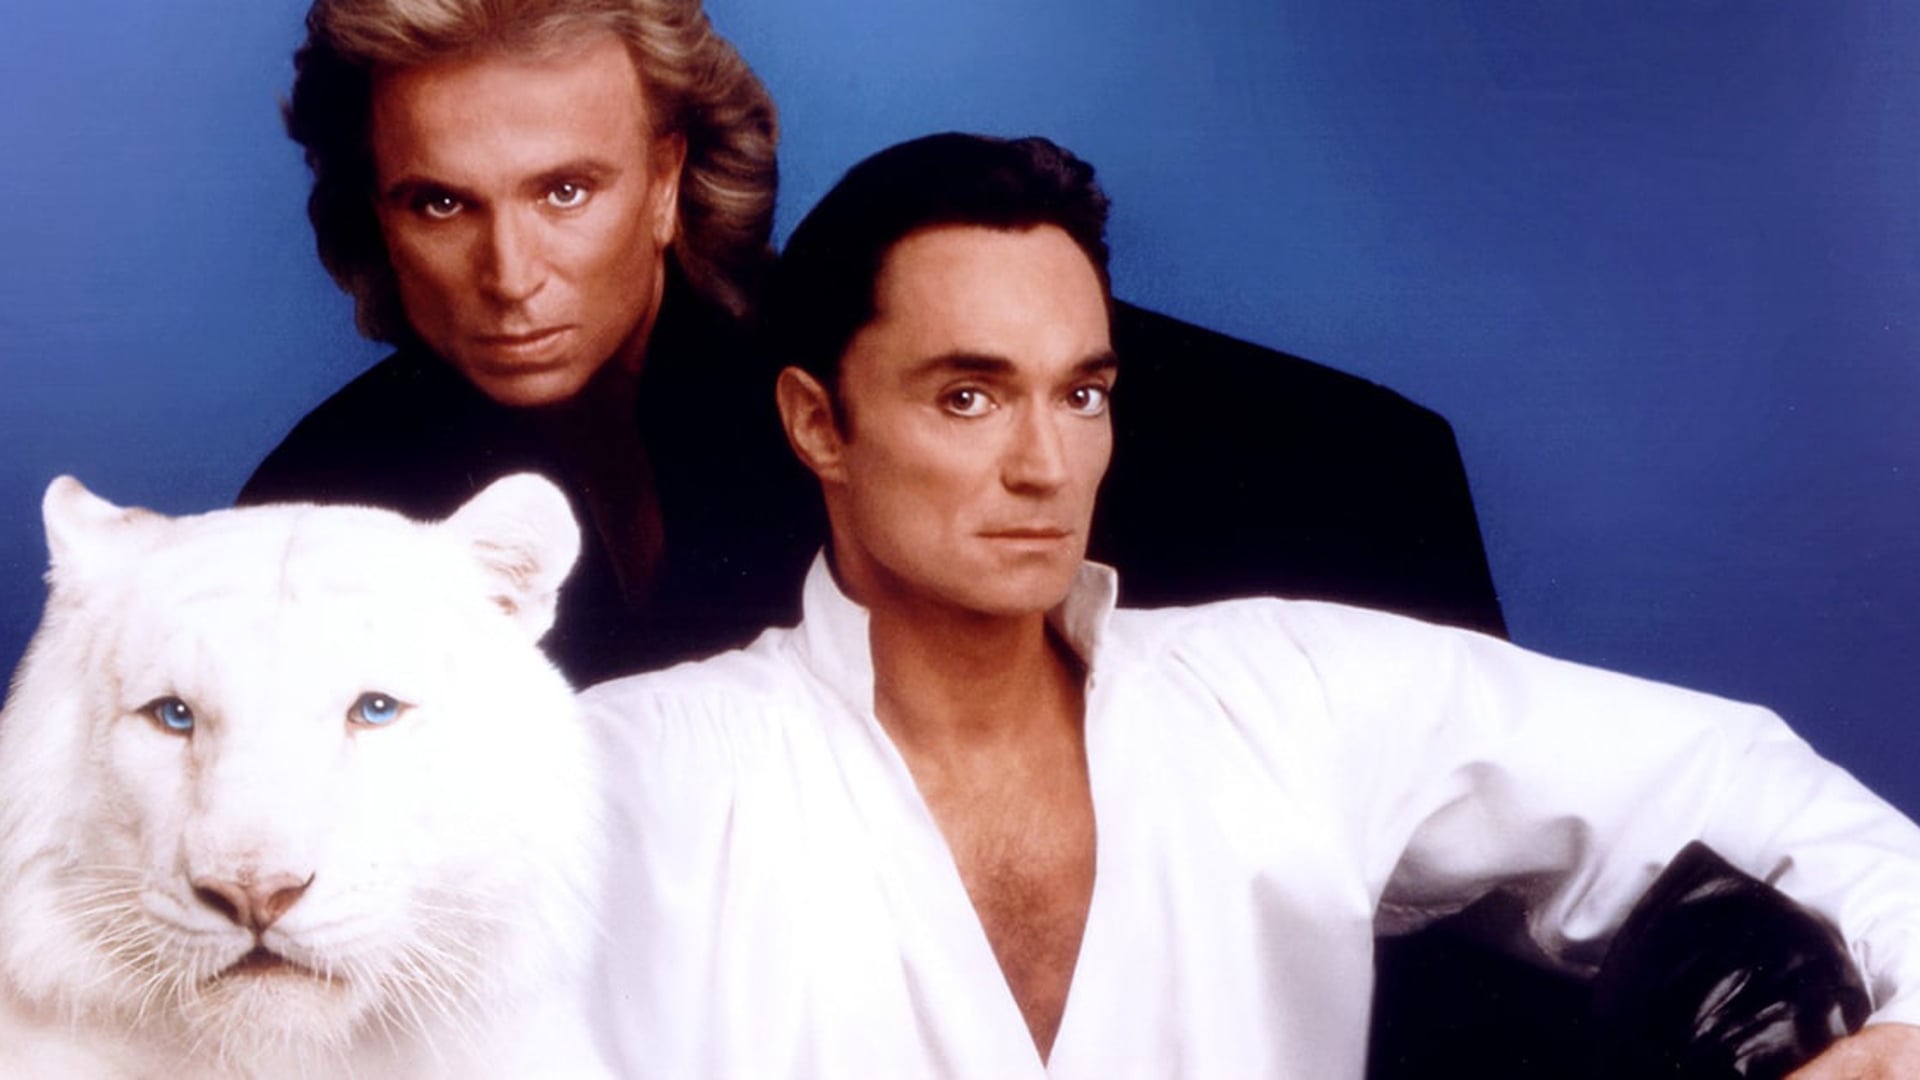 SiEGFRIED & ROY:  THE MIRACLE